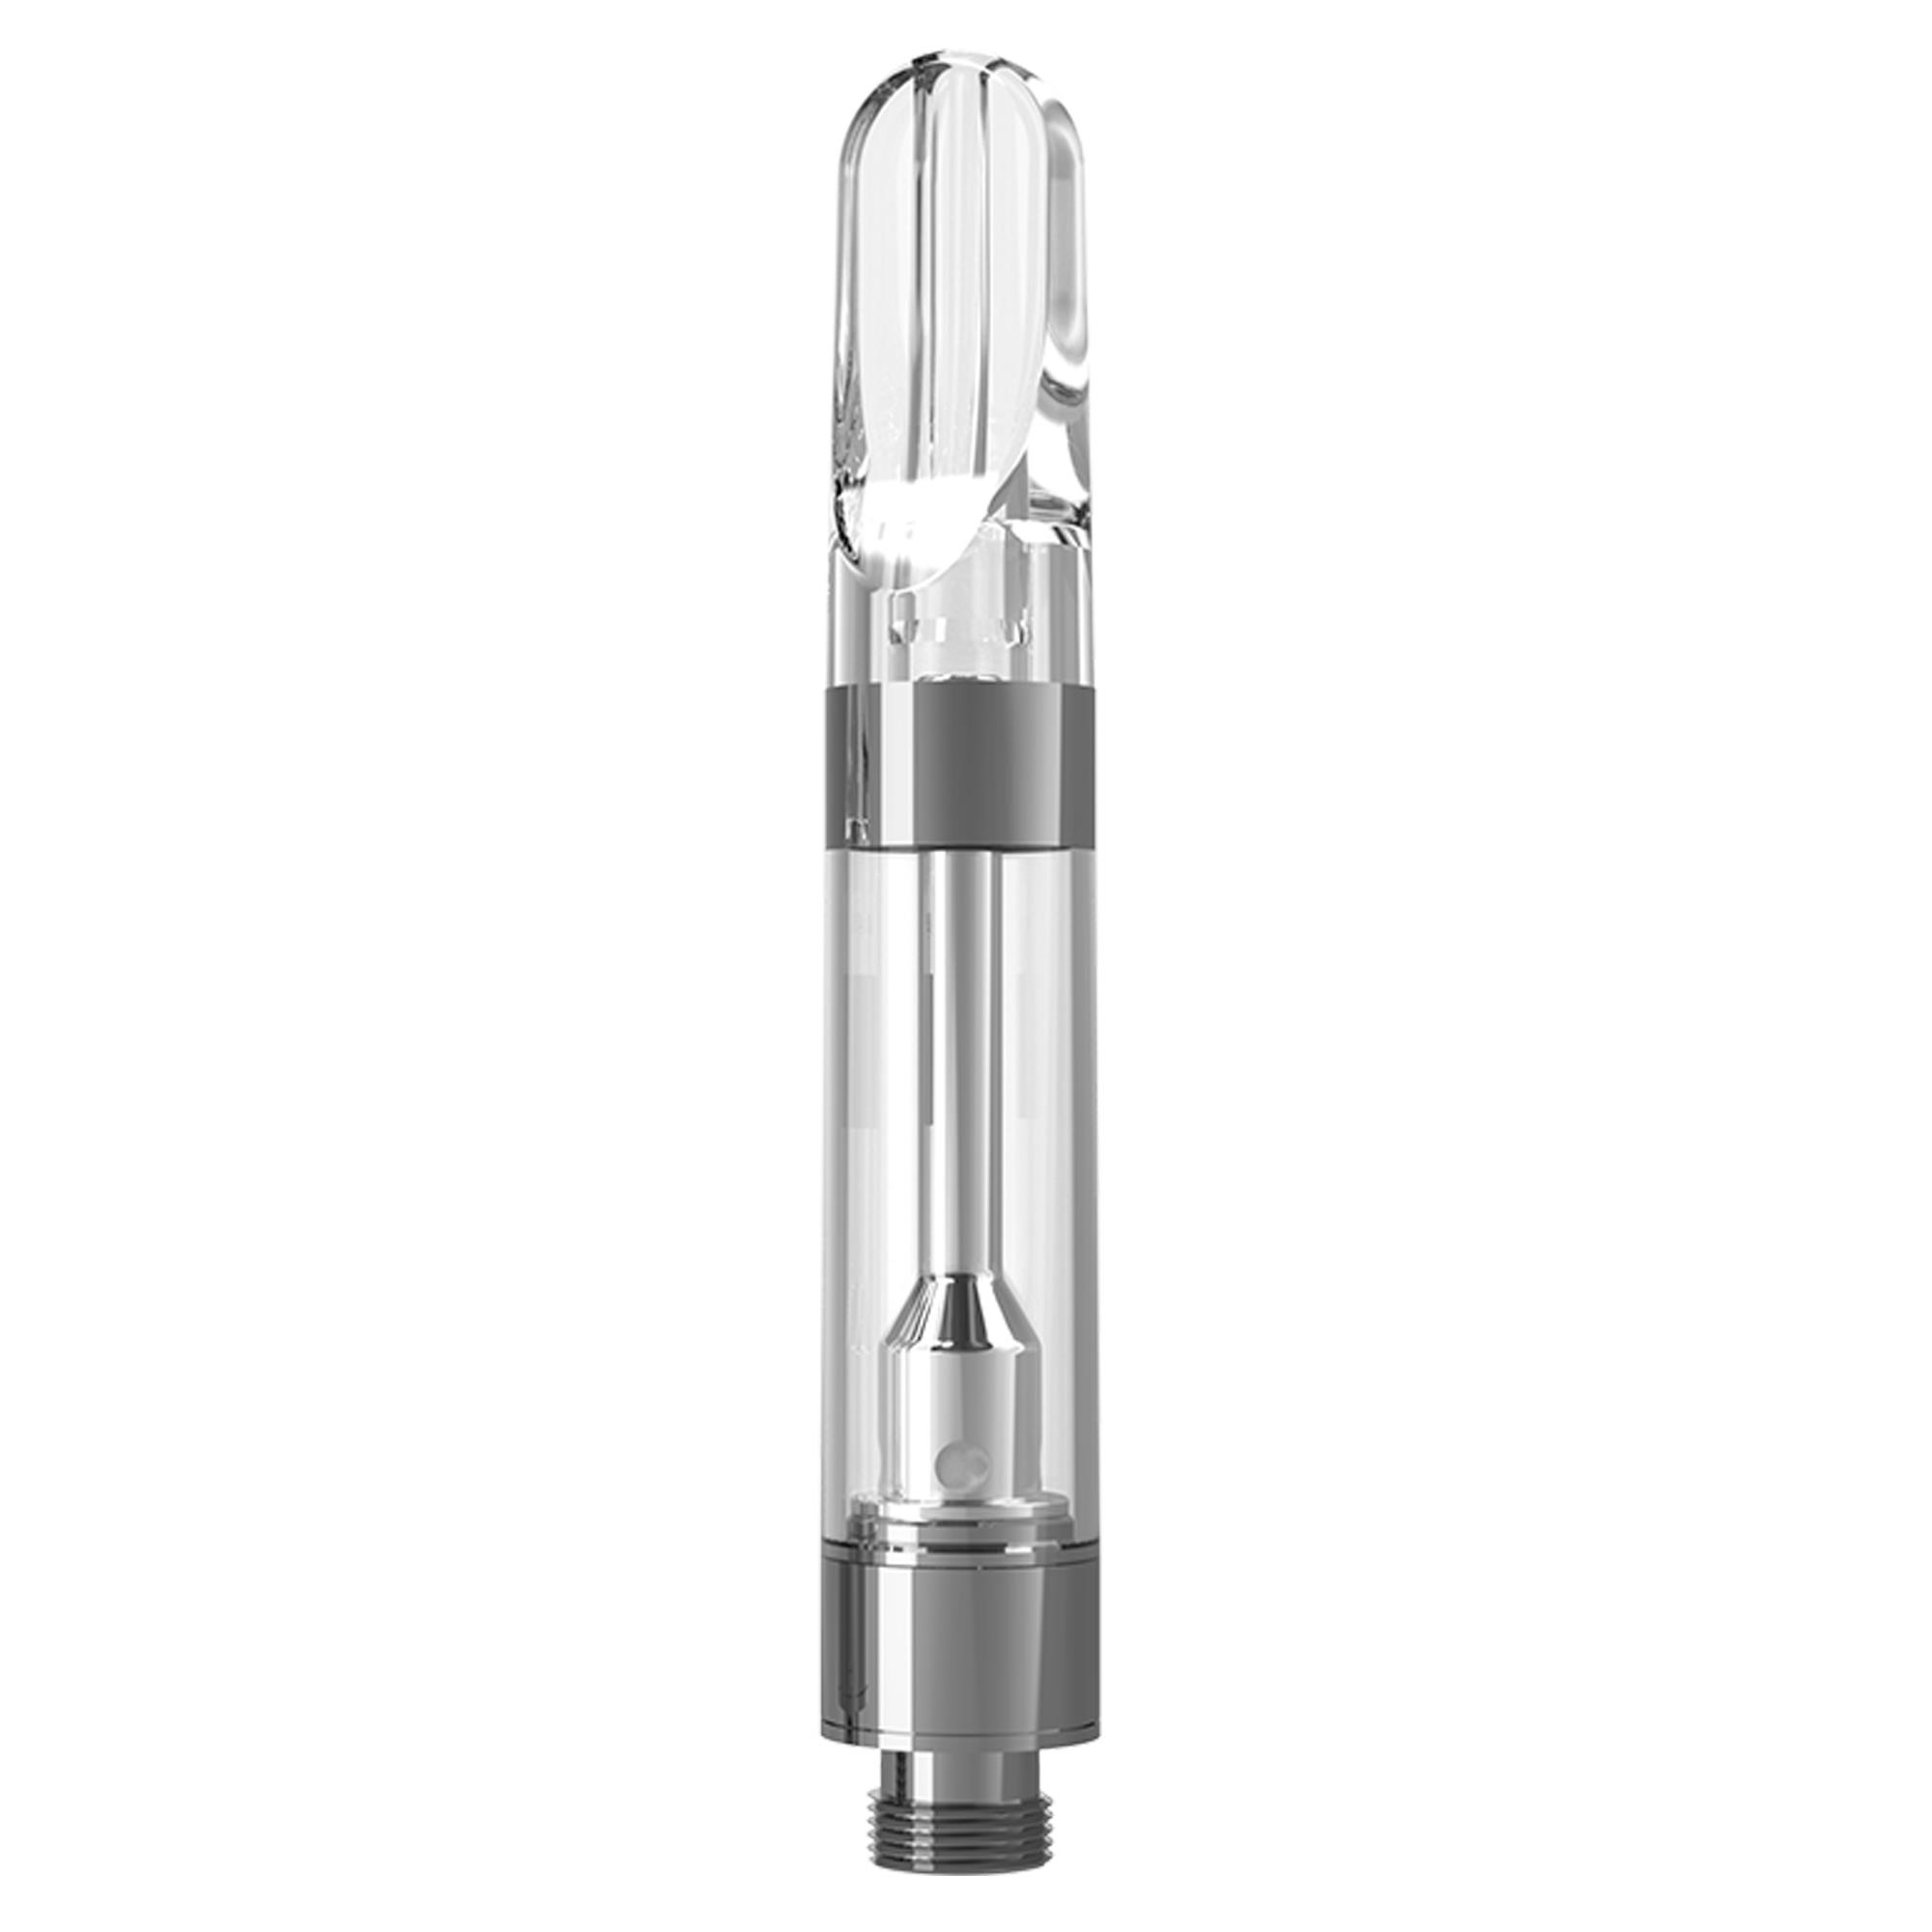 CCELL M6T 1.0ML OIL CARTRIDGE